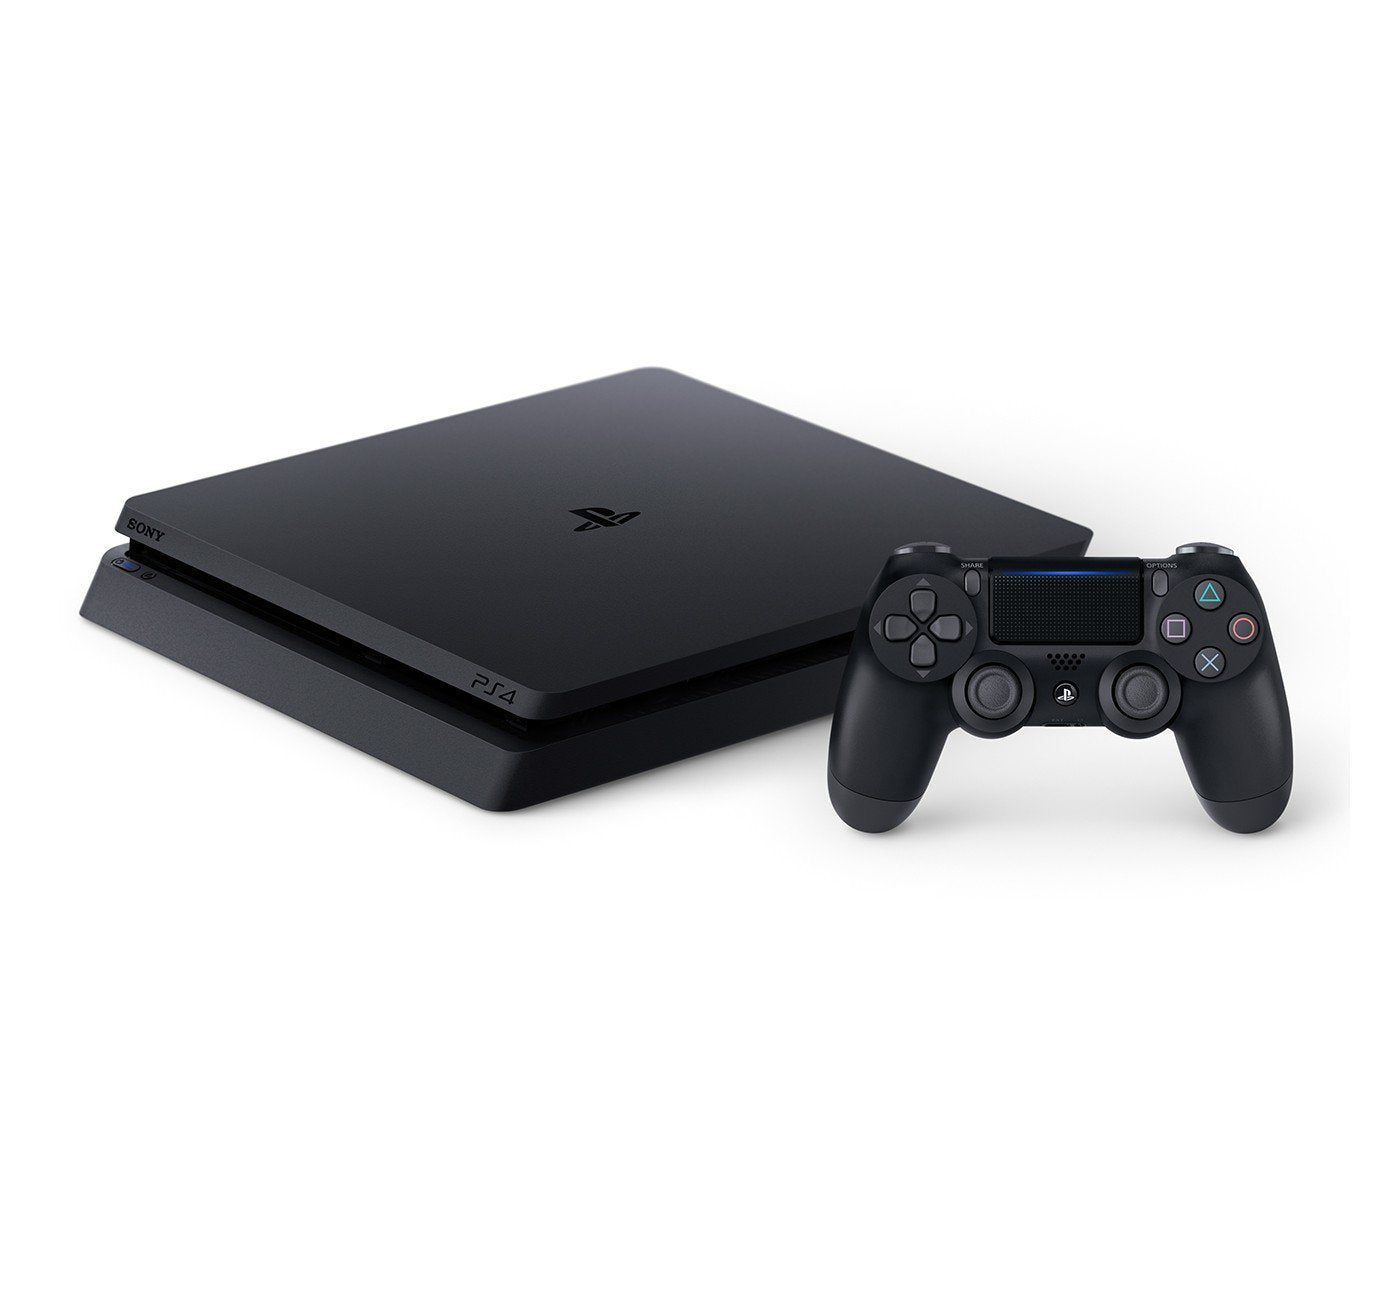 PlayStation 4 1TB Console with Ghost of Tsushima - PS4 Slim 1TB Jet Black HDR Gaming Console, Wireless Controller and Game